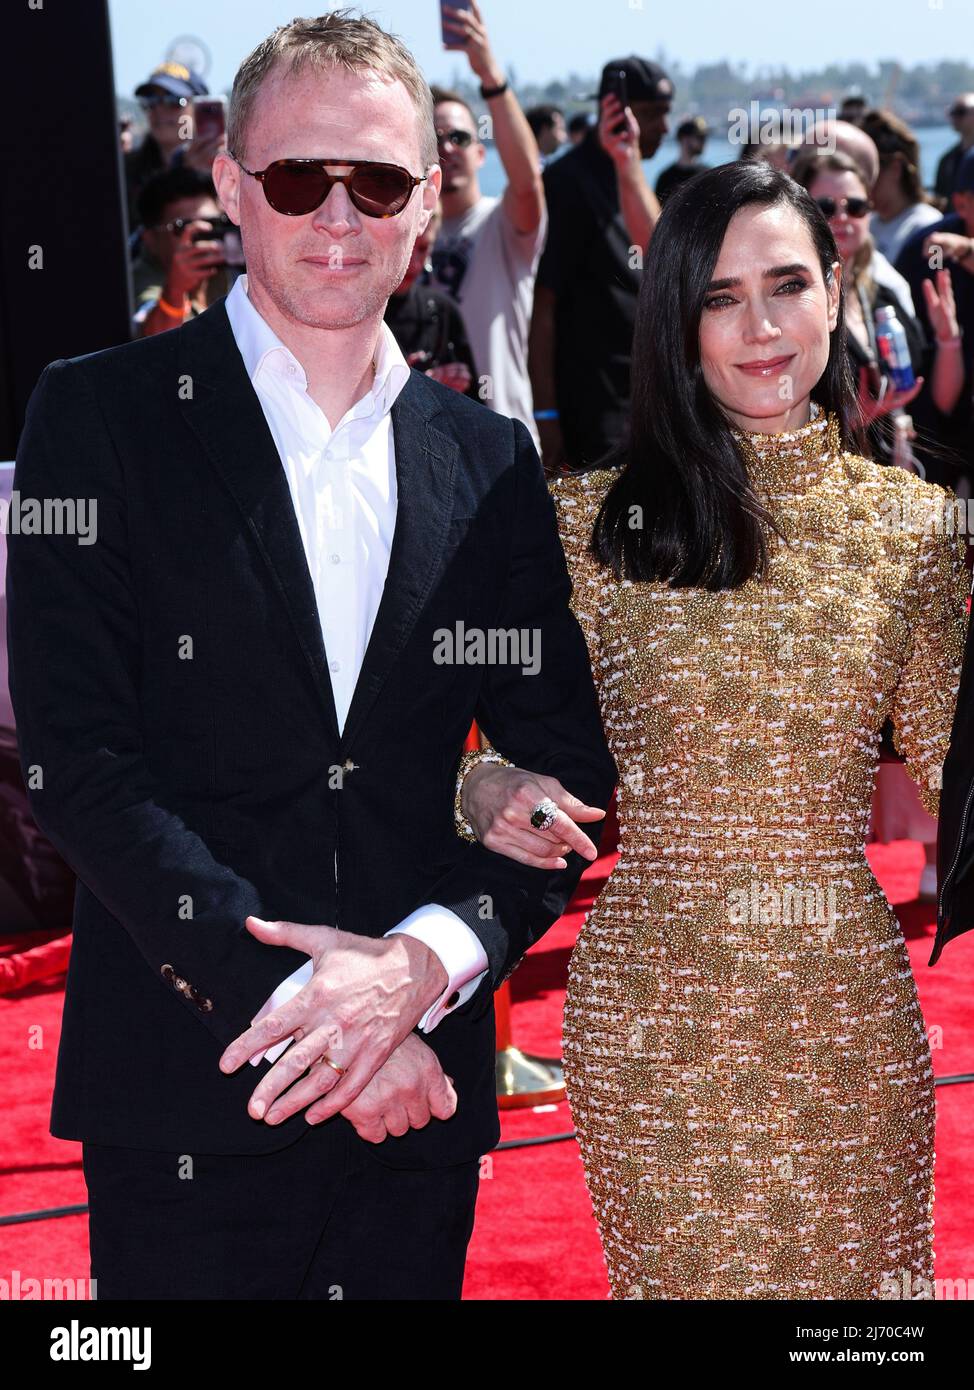 SAN DIEGO, CALIFORNIA, USA - MAY 04: English actor Paul Bettany and wife/American actress Jennifer Connelly arrive at the World Premiere Of Paramount Pictures' 'Top Gun: Maverick' held at the USS Midway Museum on May 4, 2022 in San Diego, California, United States. (Photo by Xavier Collin/Image Press Agency) Stock Photo